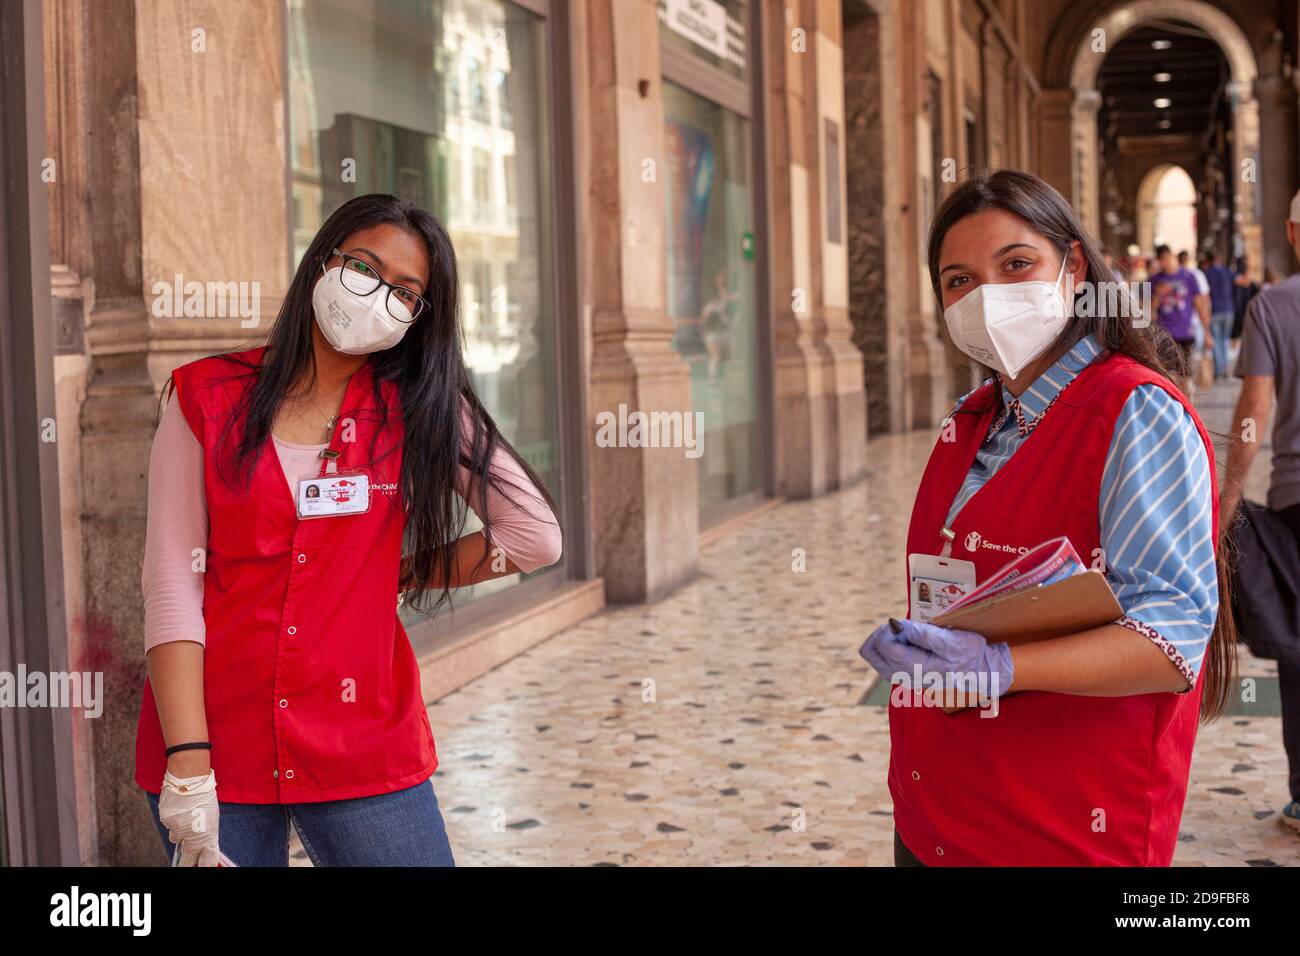 BOLOGNA, ITALY 17 JUNE 2020: Promoter for save the children on the streets Stock Photo